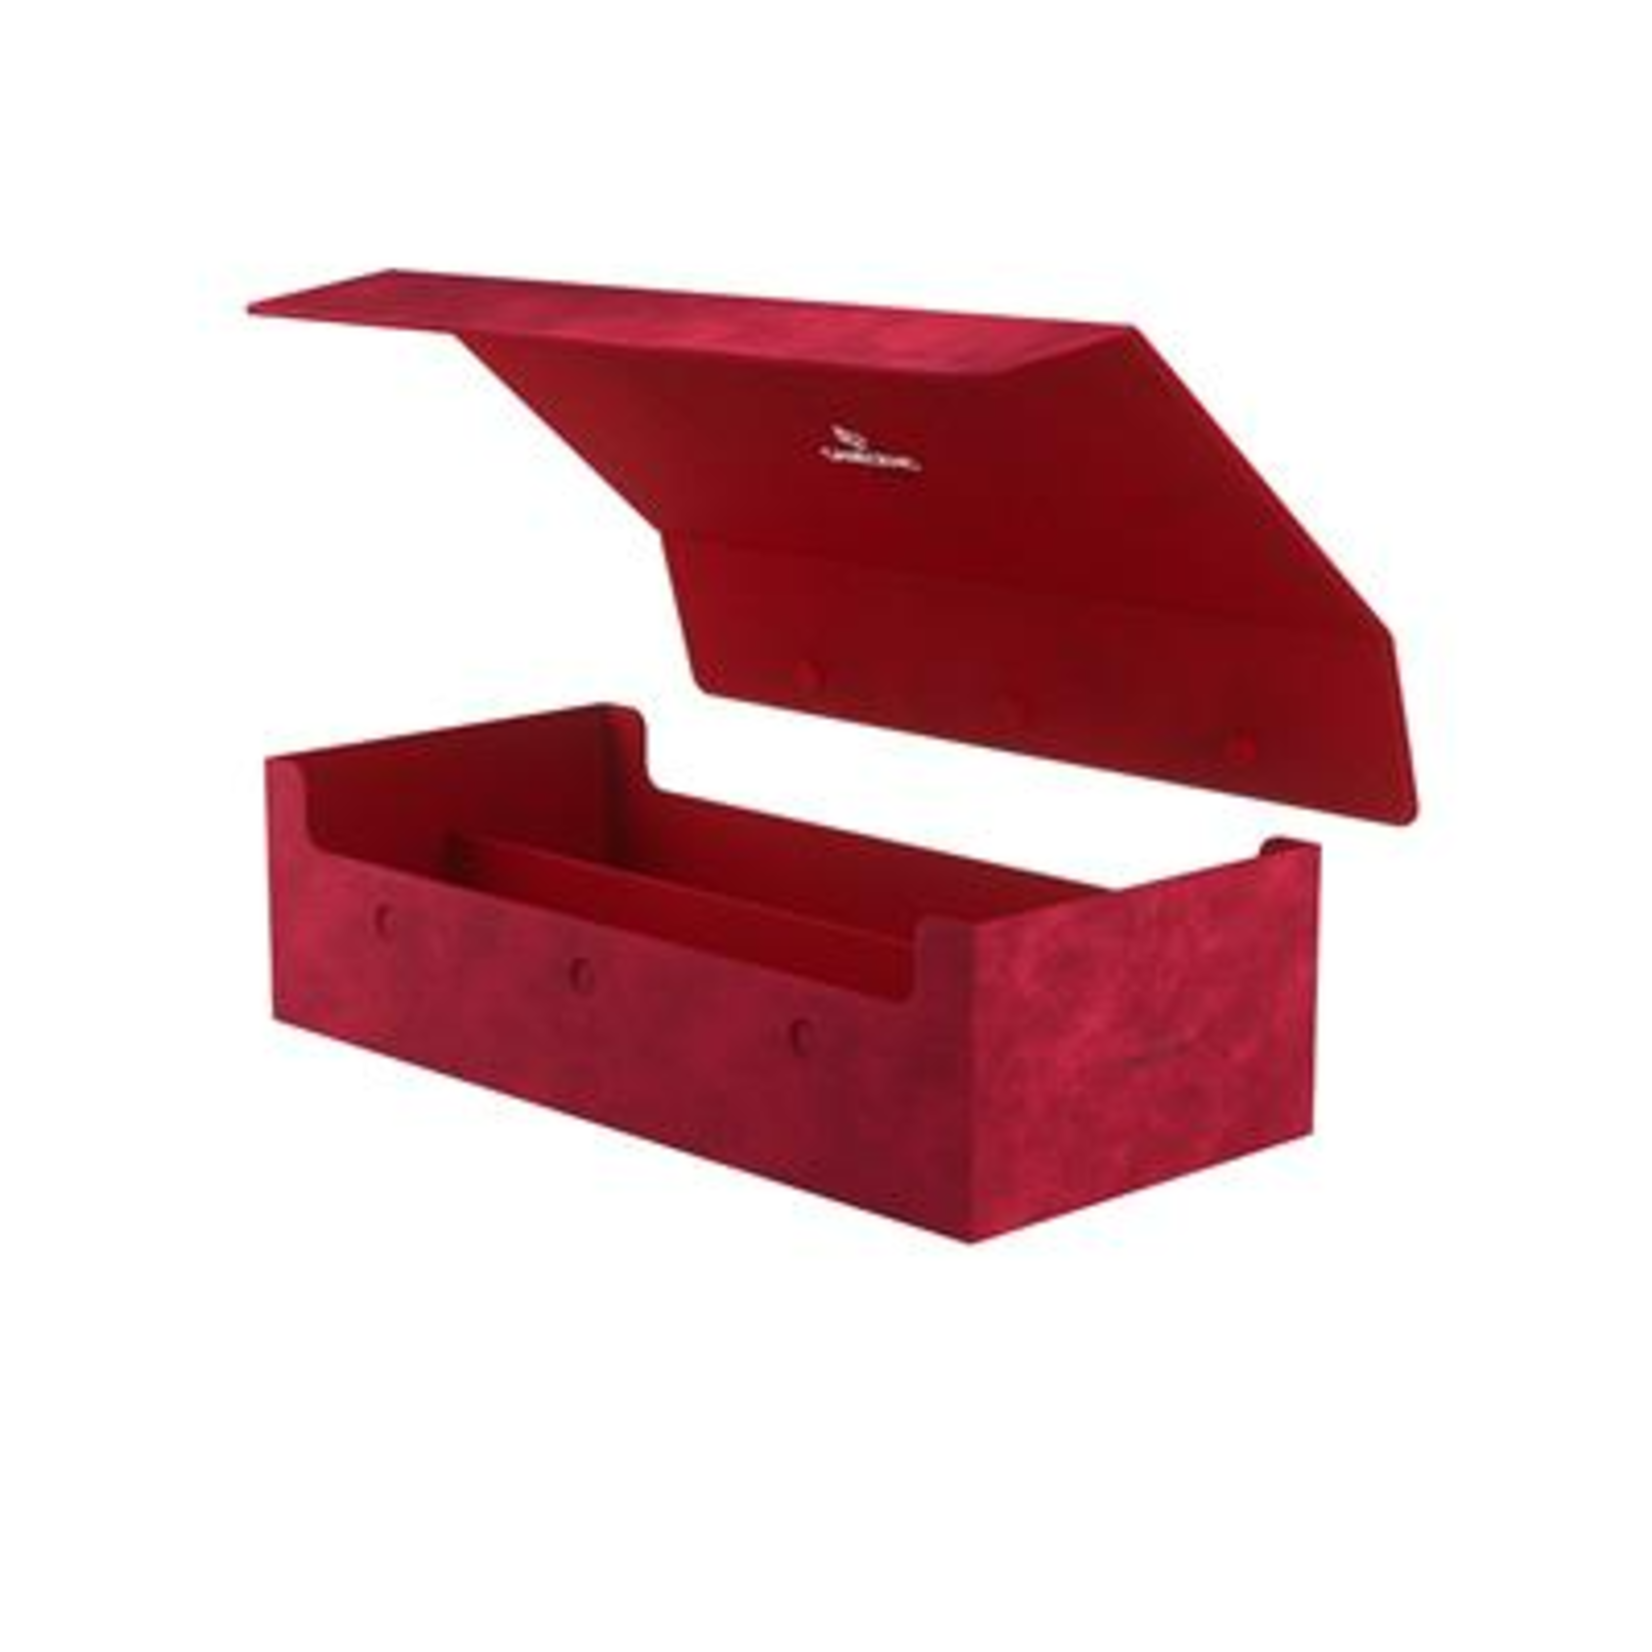 Gamegenic GameGenic Dungeon Convertible Deck Box 1100+ Red